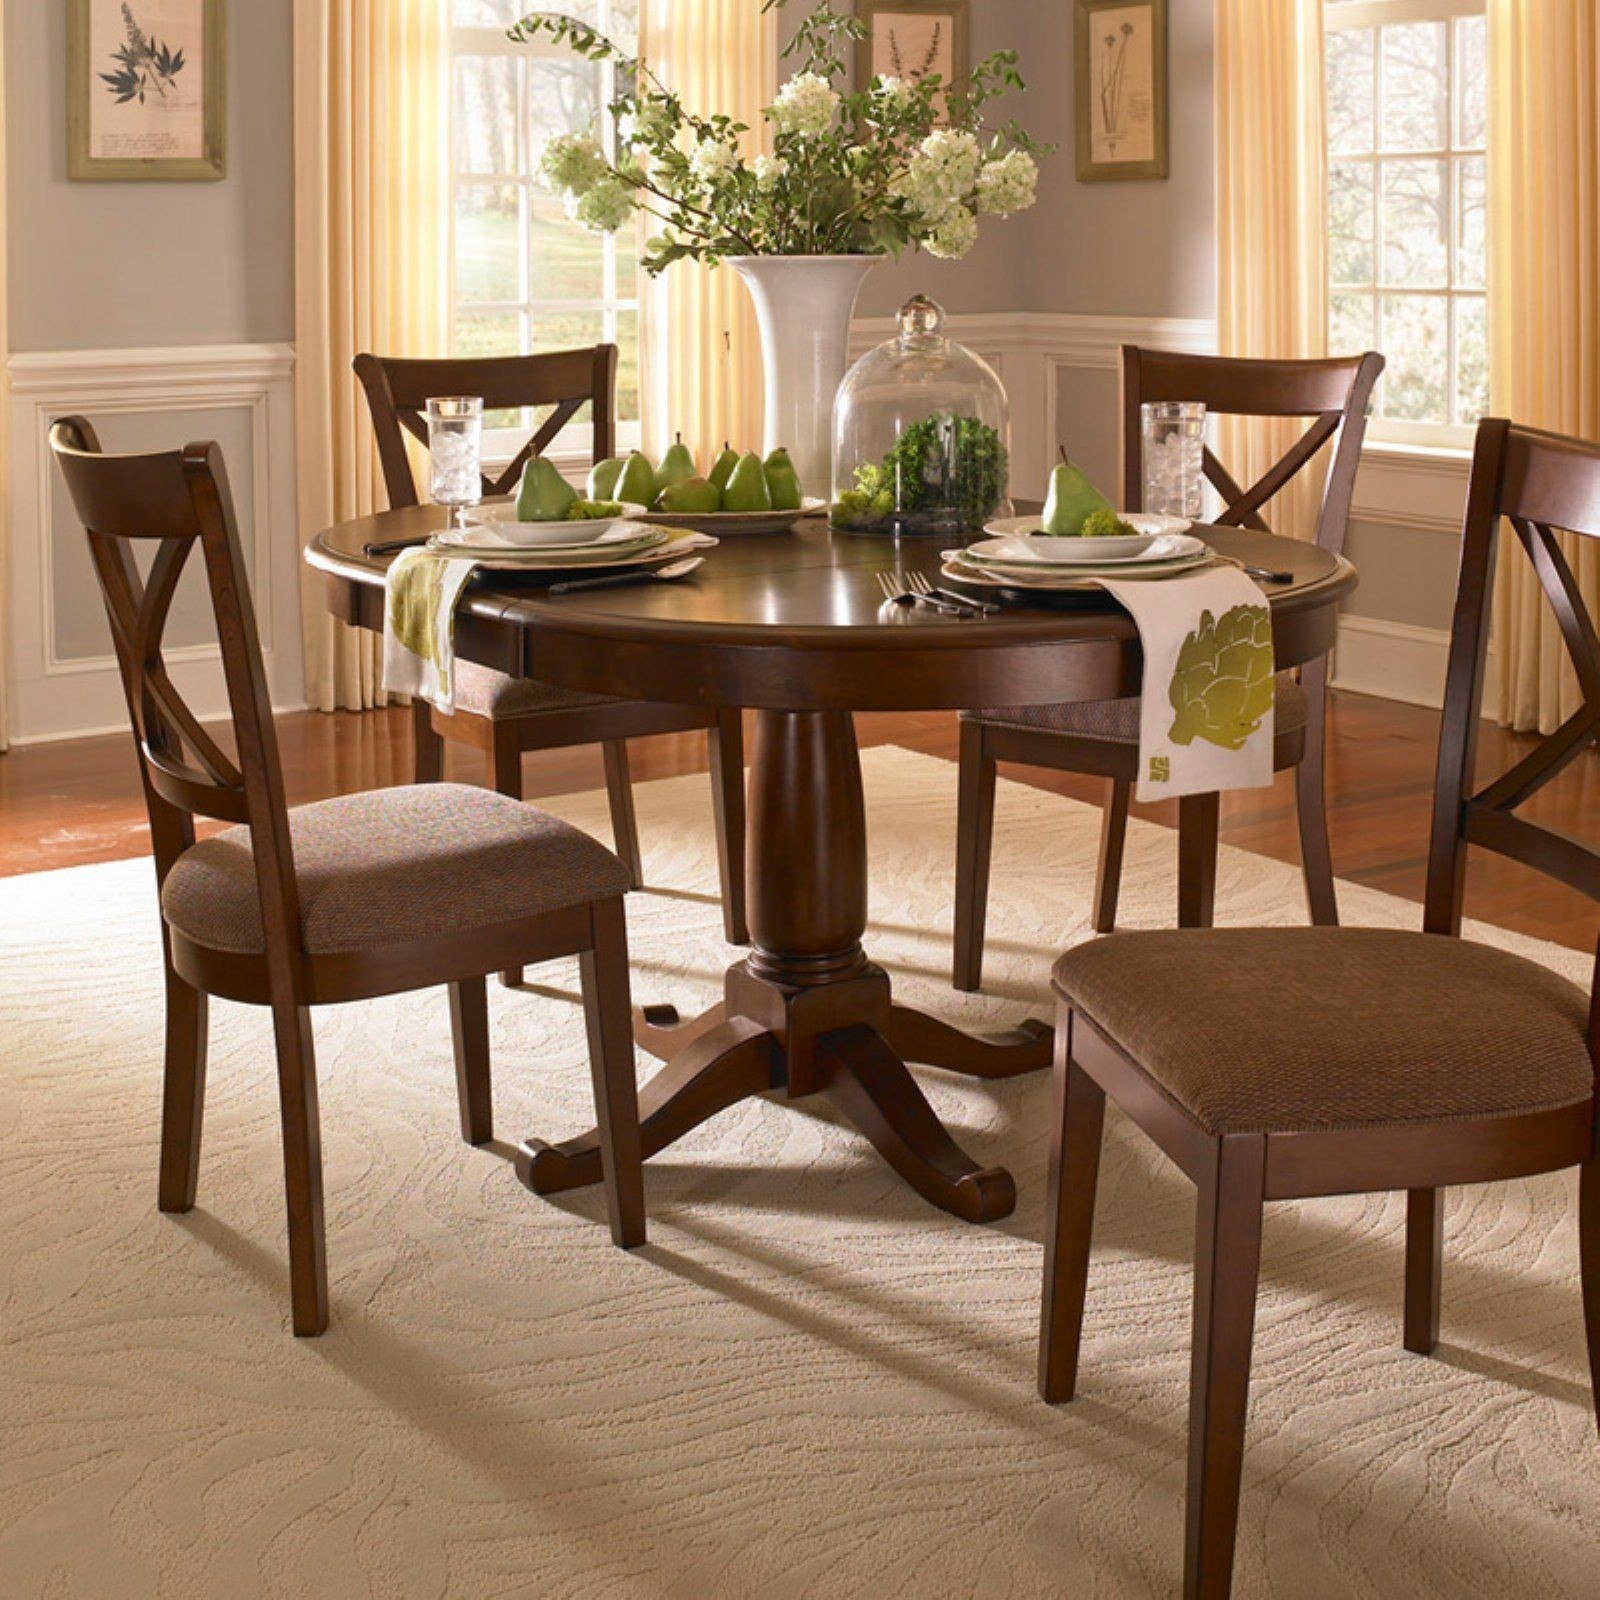 A america desoto oval dining table with leaf in 2020